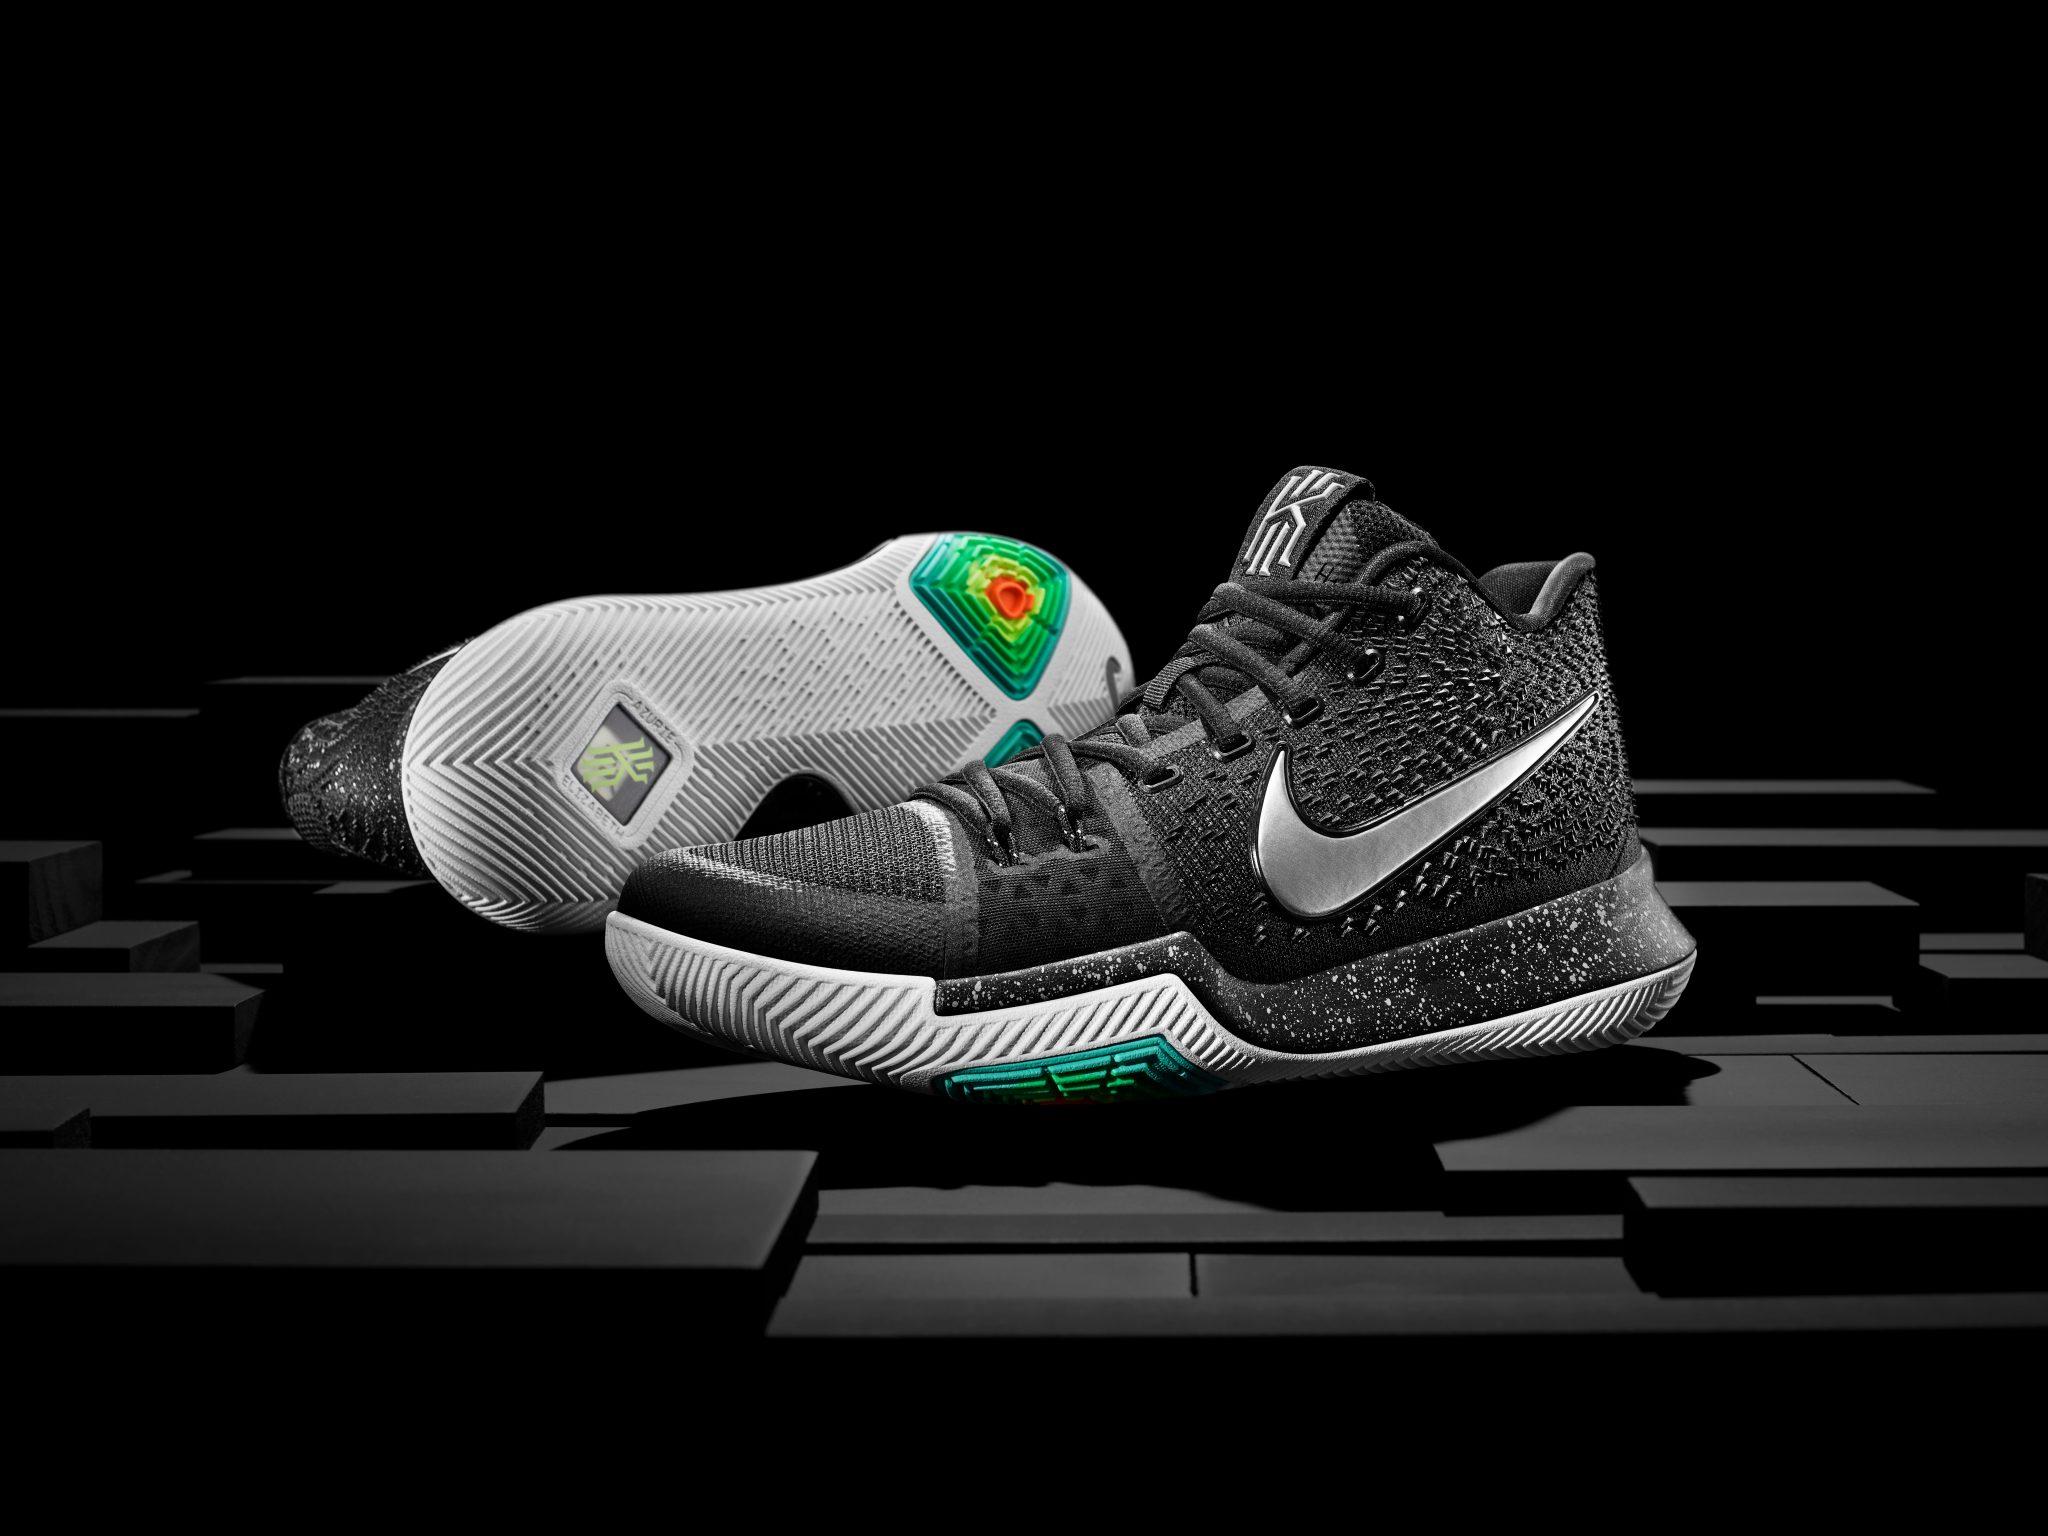 Nike Basketball's Kyrie 3 to release December 26 (Pics)